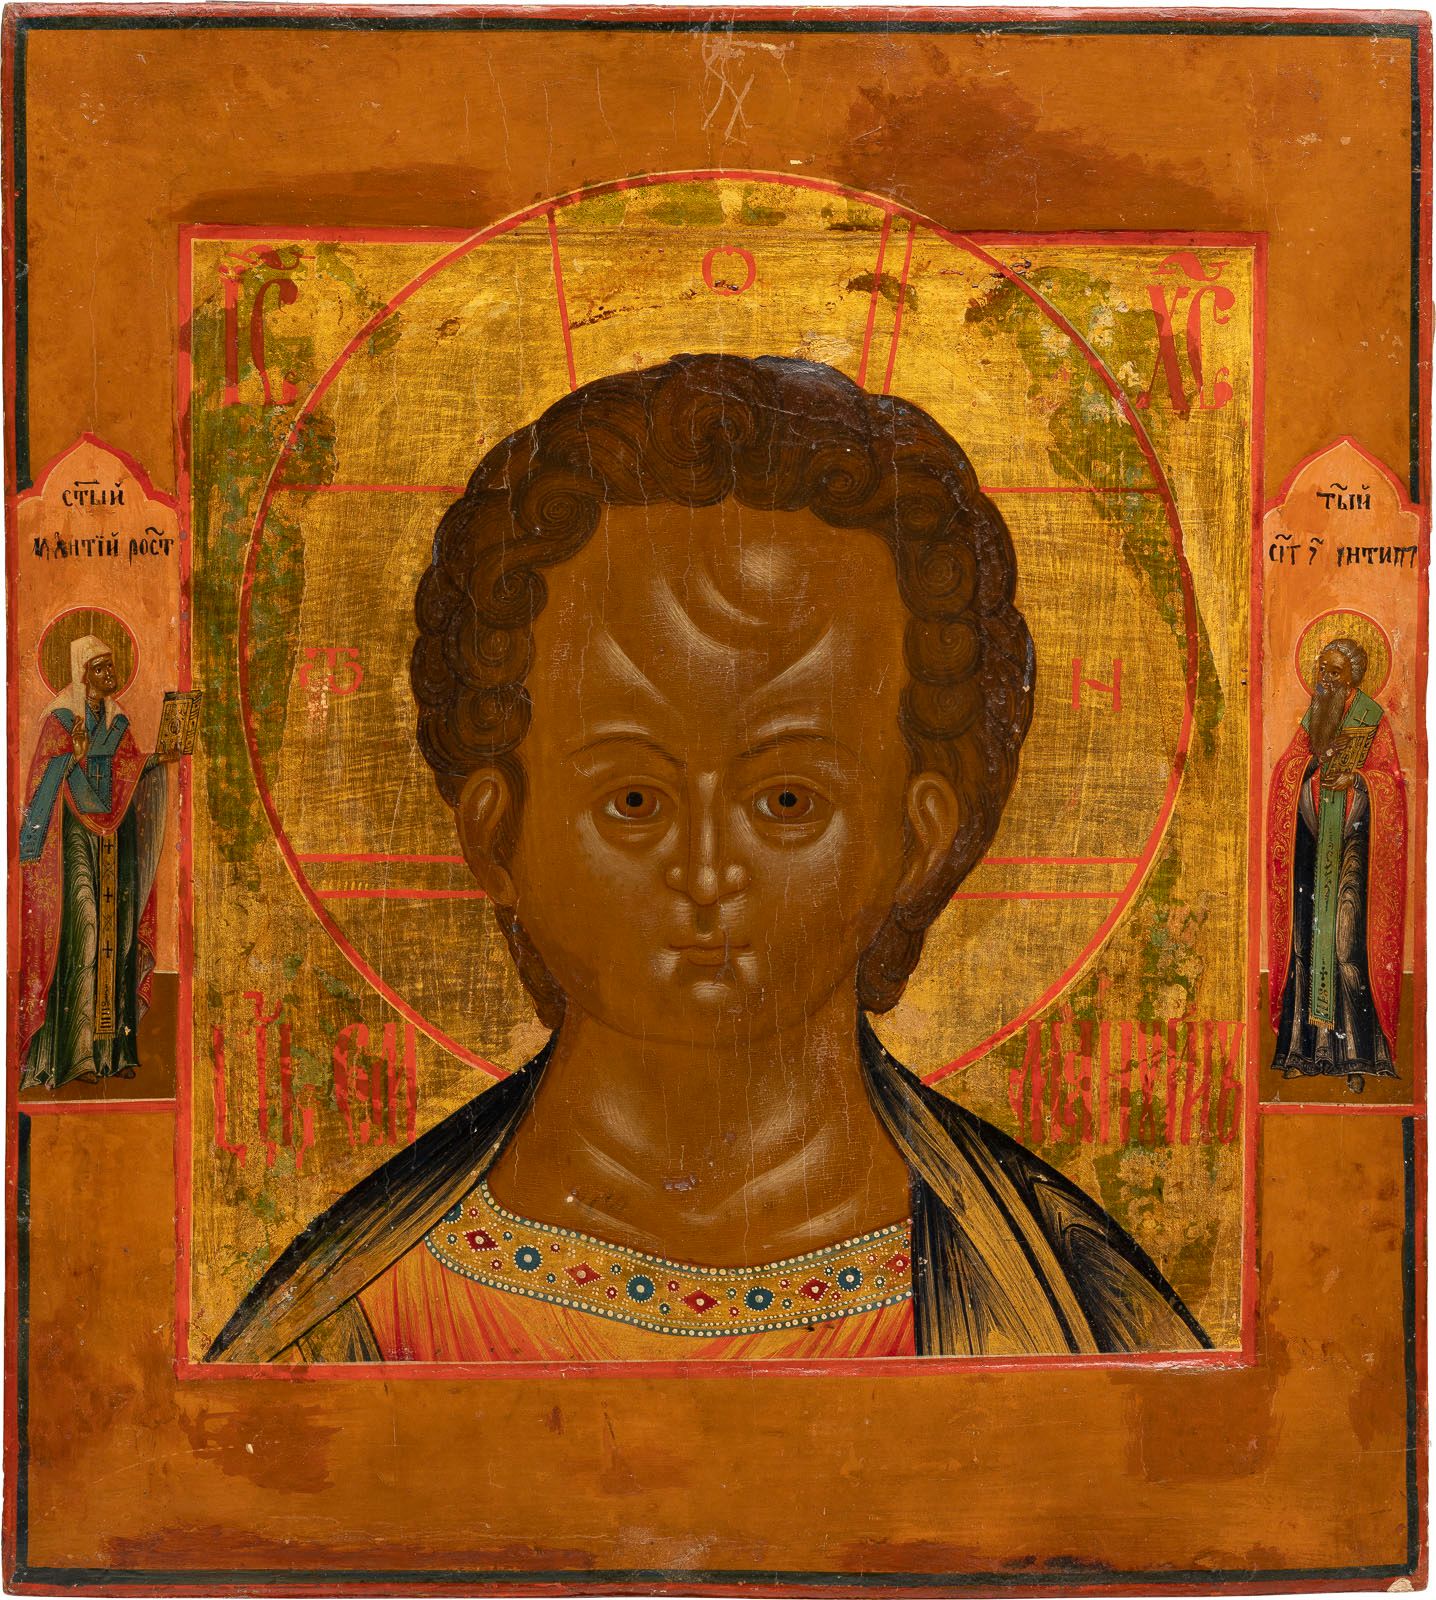 AN ICON SHOWING CHRIST EMMANUEL FROM A DEISIS ICONO QUE MUESTRA A CRISTO EMMANUE&hellip;